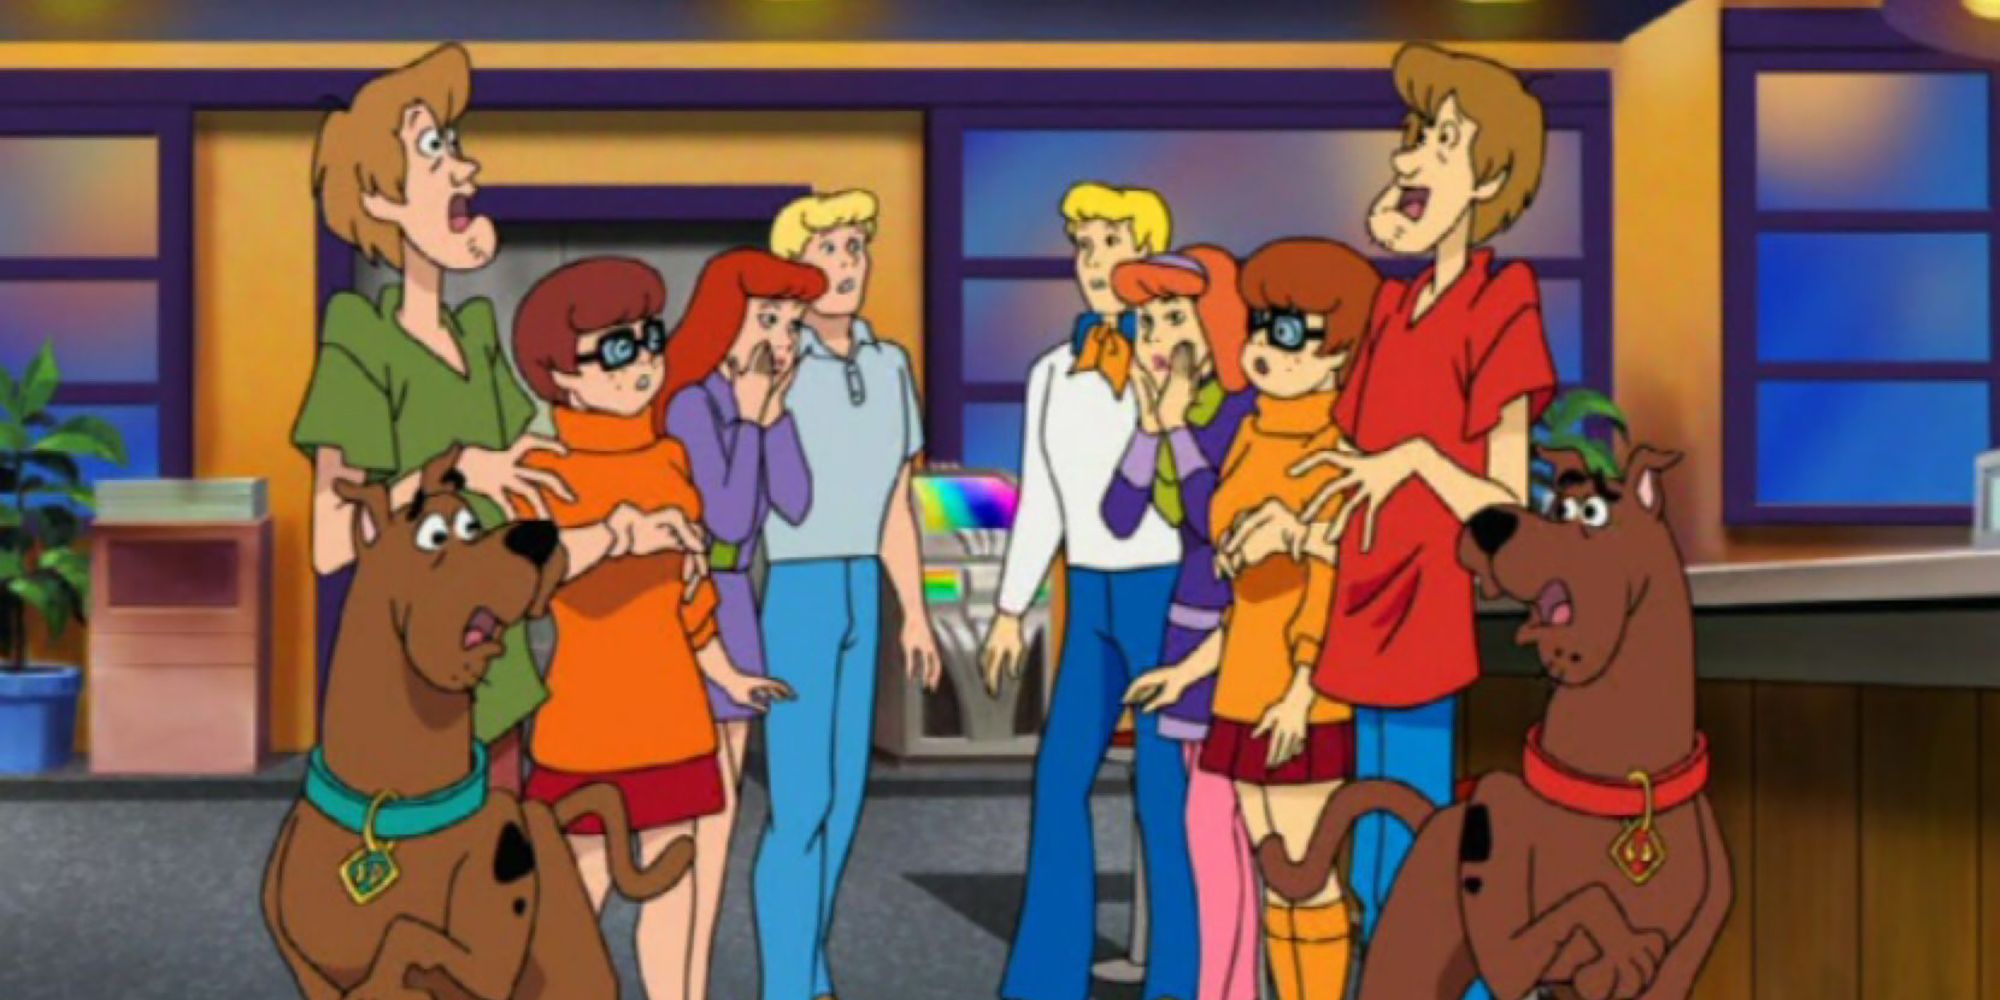 Scooby-Doo And The Cyber Chase